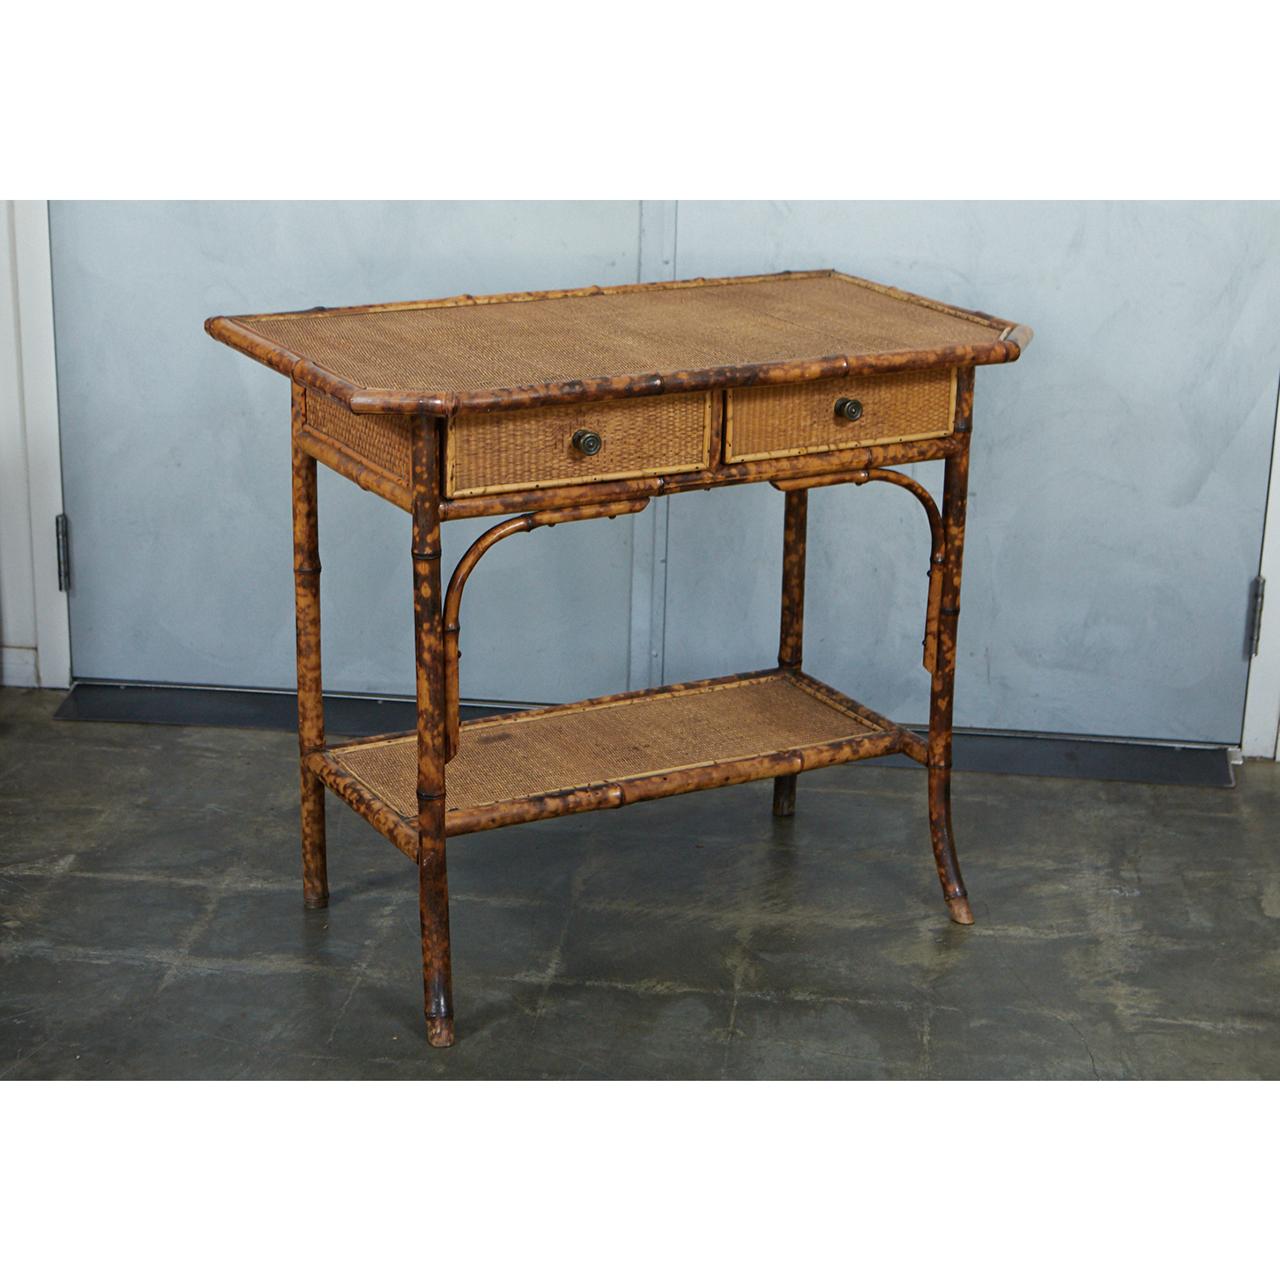 This nice tiger bamboo table/desk has two shaped corners and two squared corners. The table has one narrow shelf allowing for use as a desk. The table has reinforced bamboo legs waxed cane matte. 

 